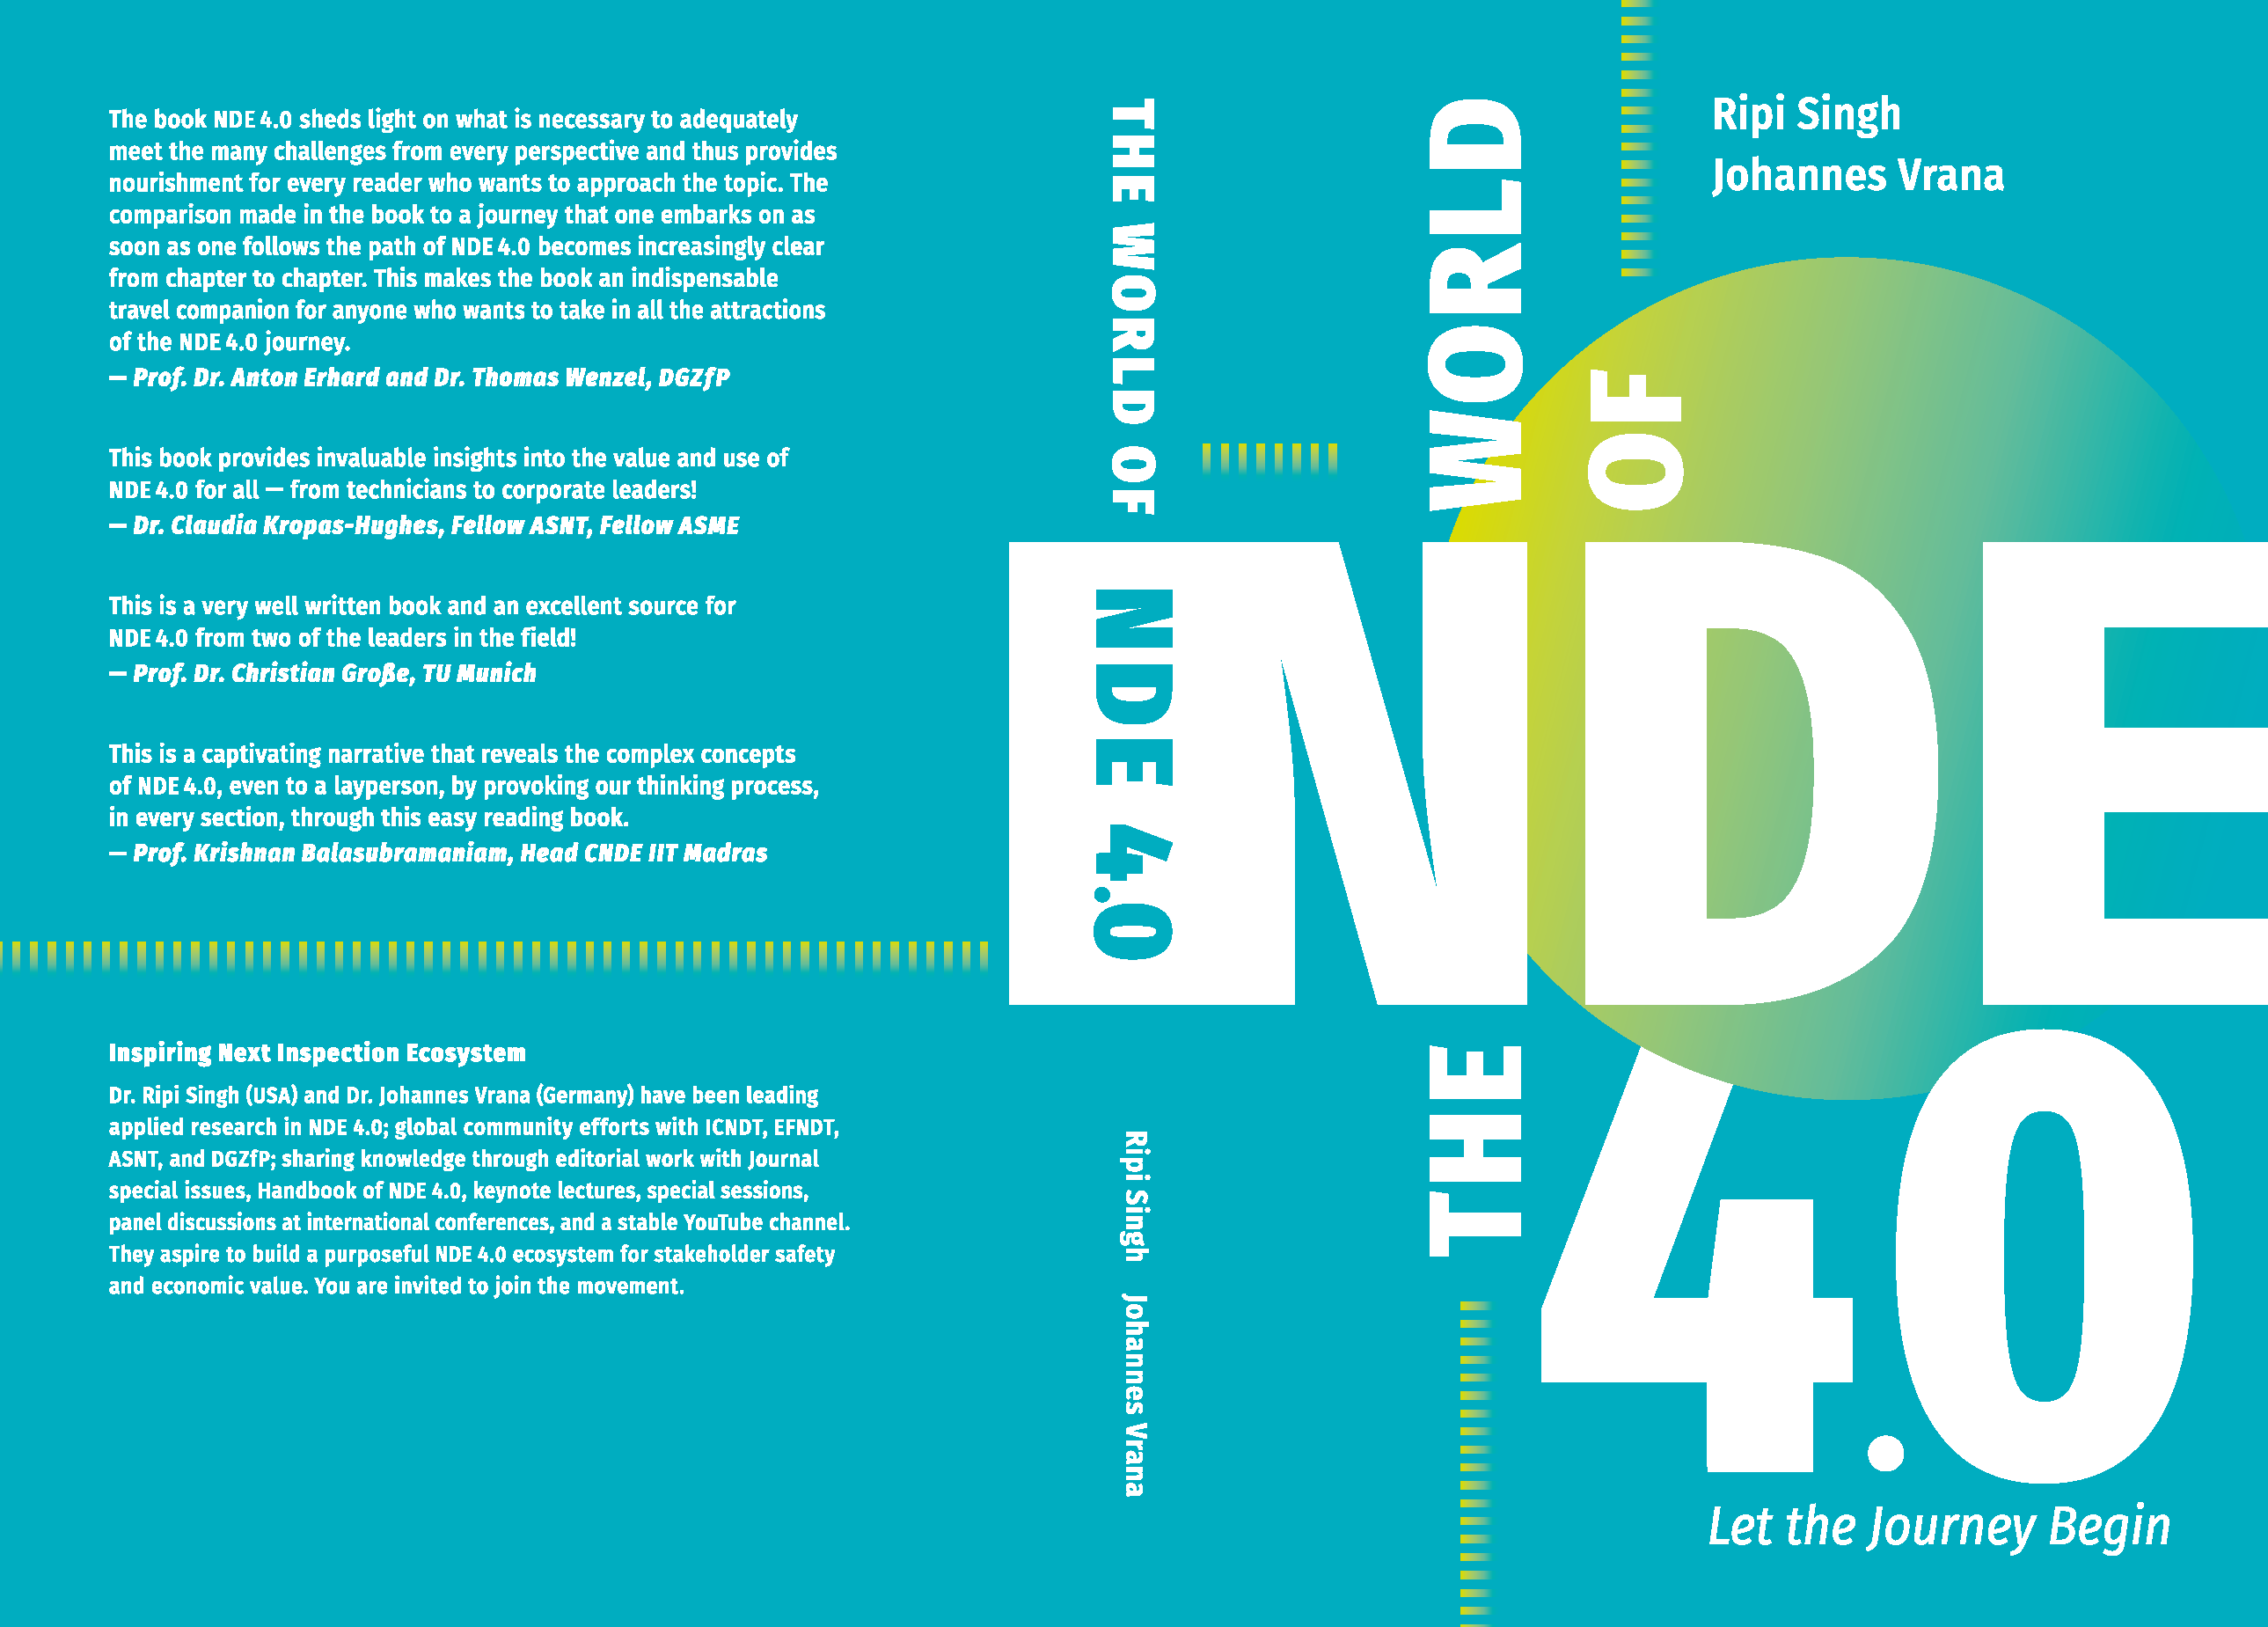 Cover The World of NDE 4.0